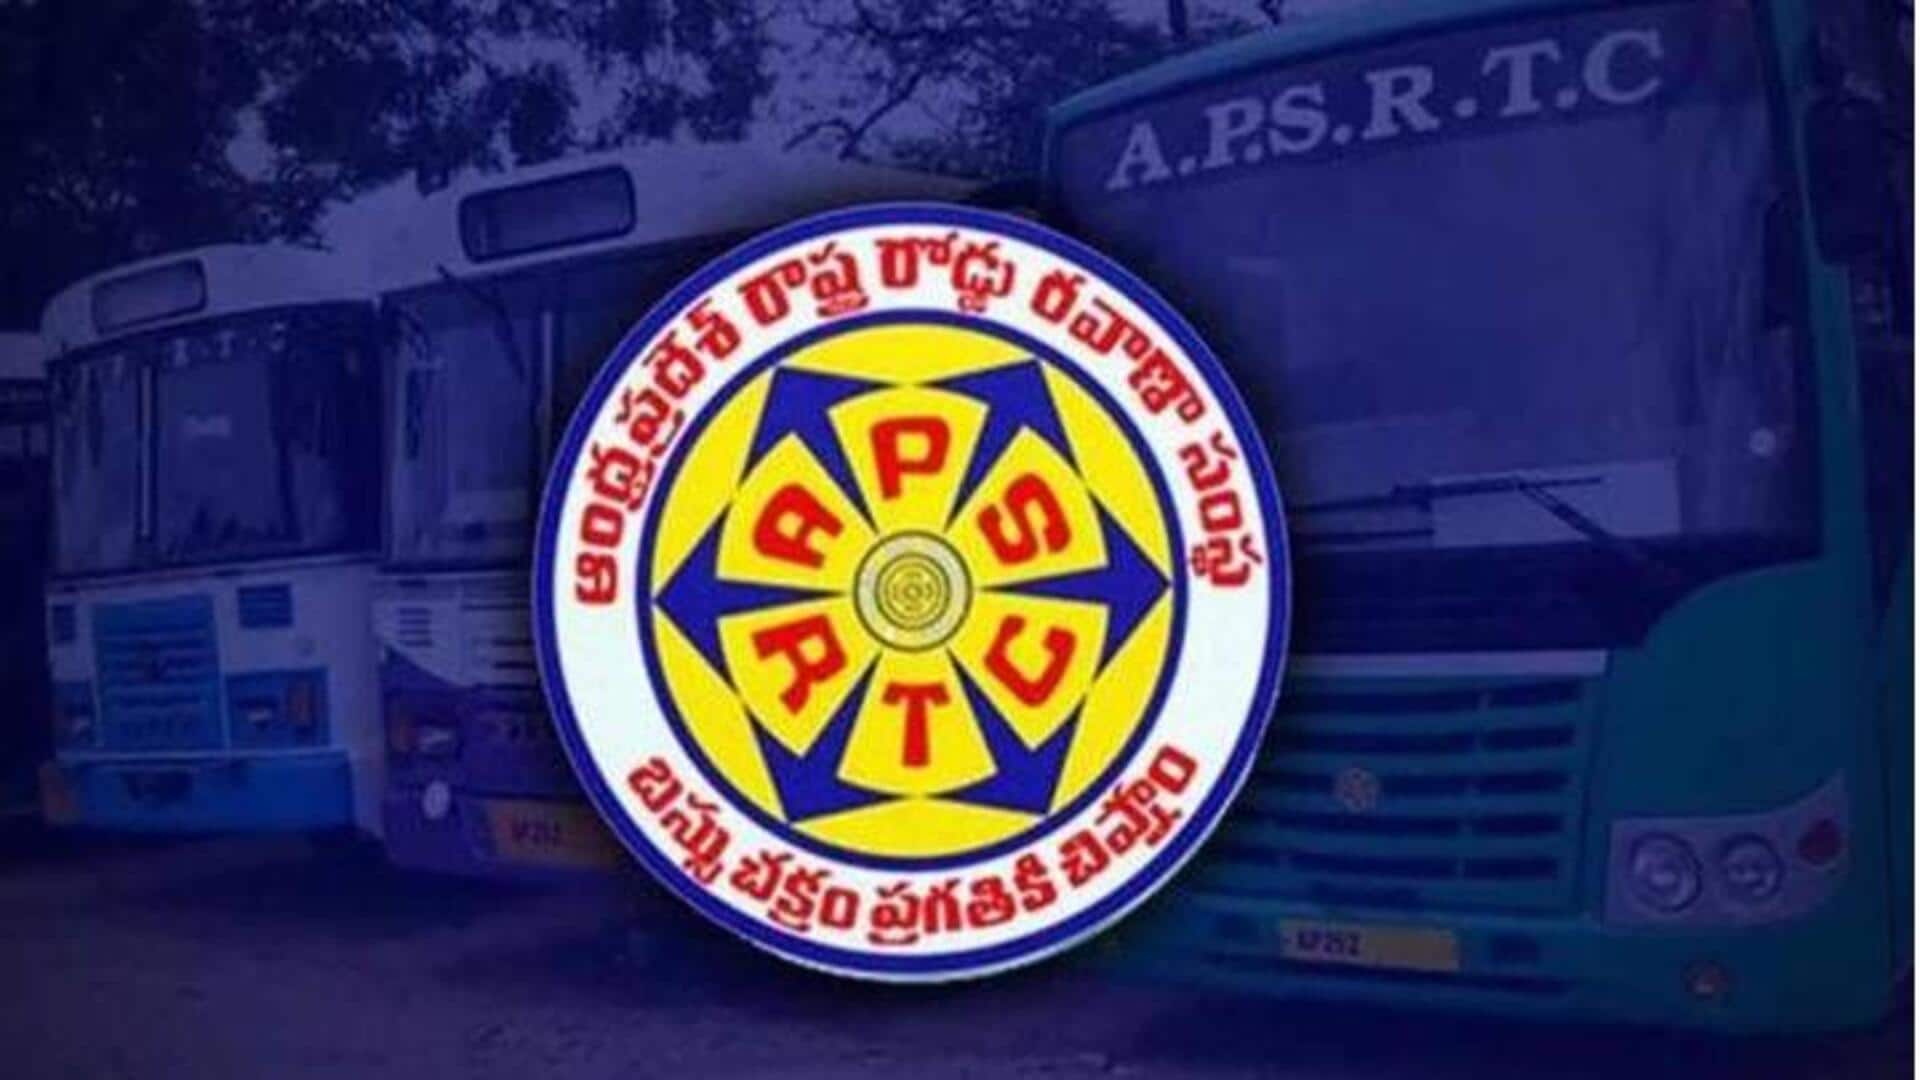 APSRTC Parcel service || faster than courier - YouTube